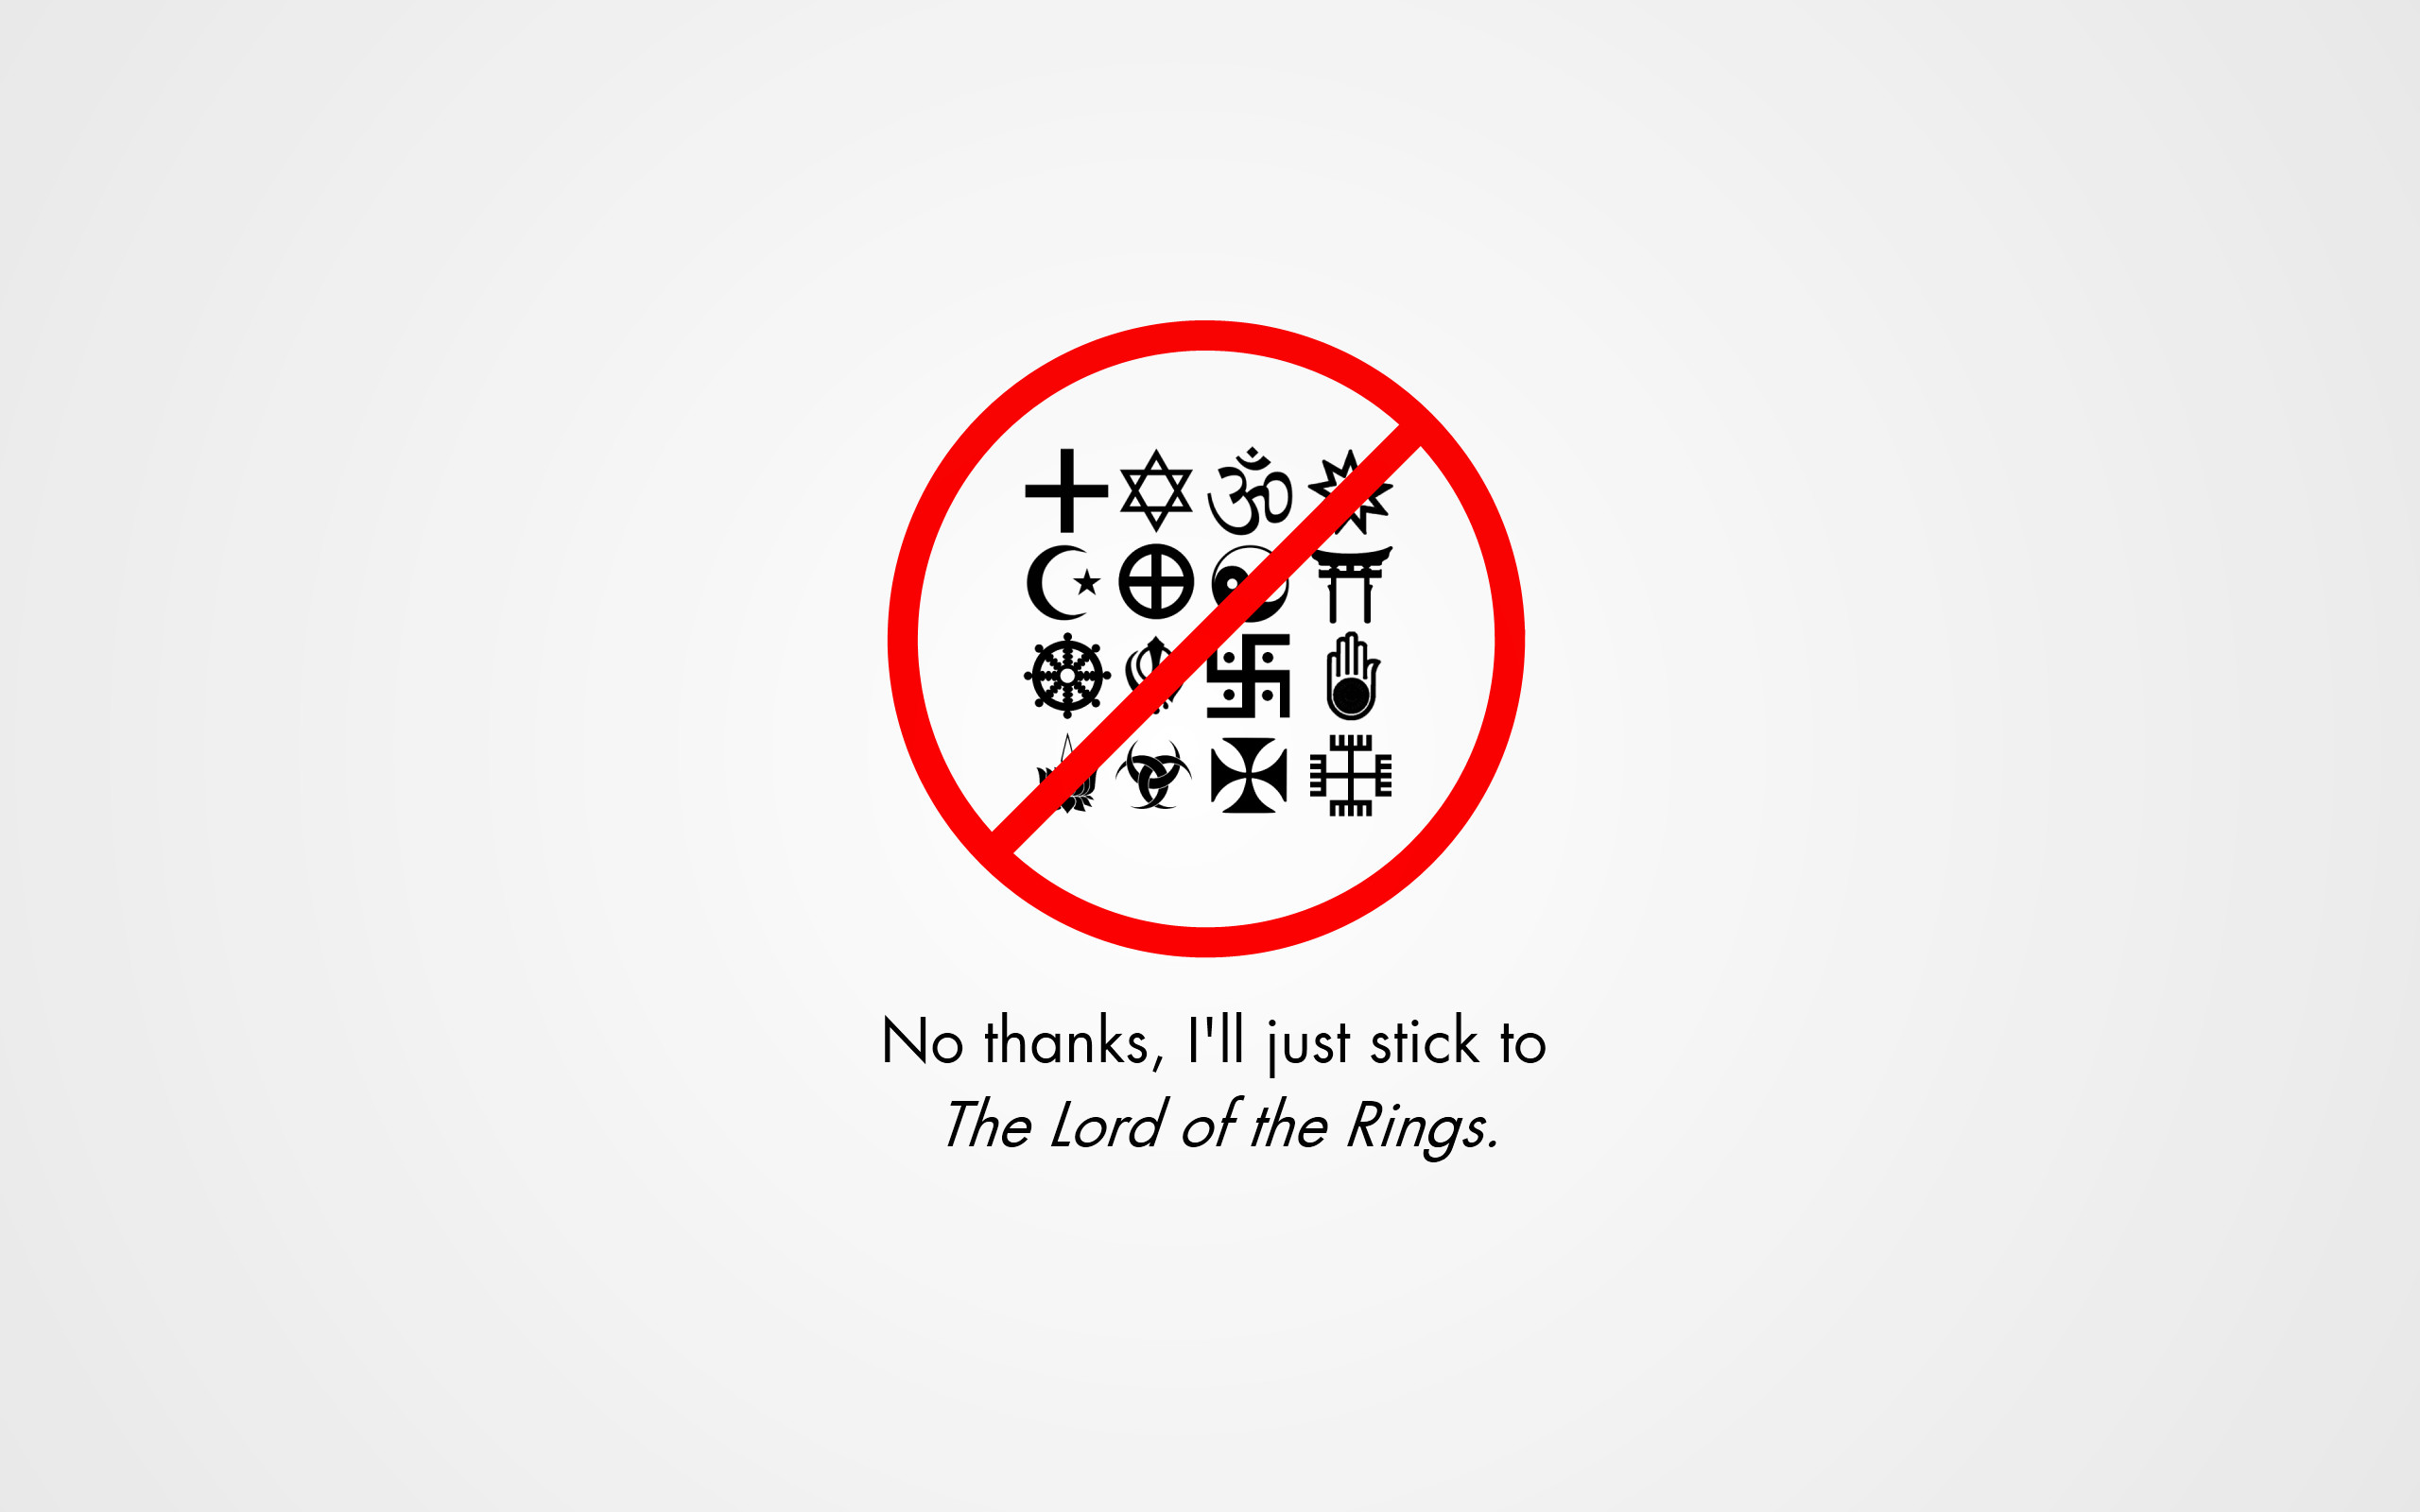 2560x1600 Humor the lord of the rings religion atheism white background wallpaper |   | 22355 | WallpaperUP